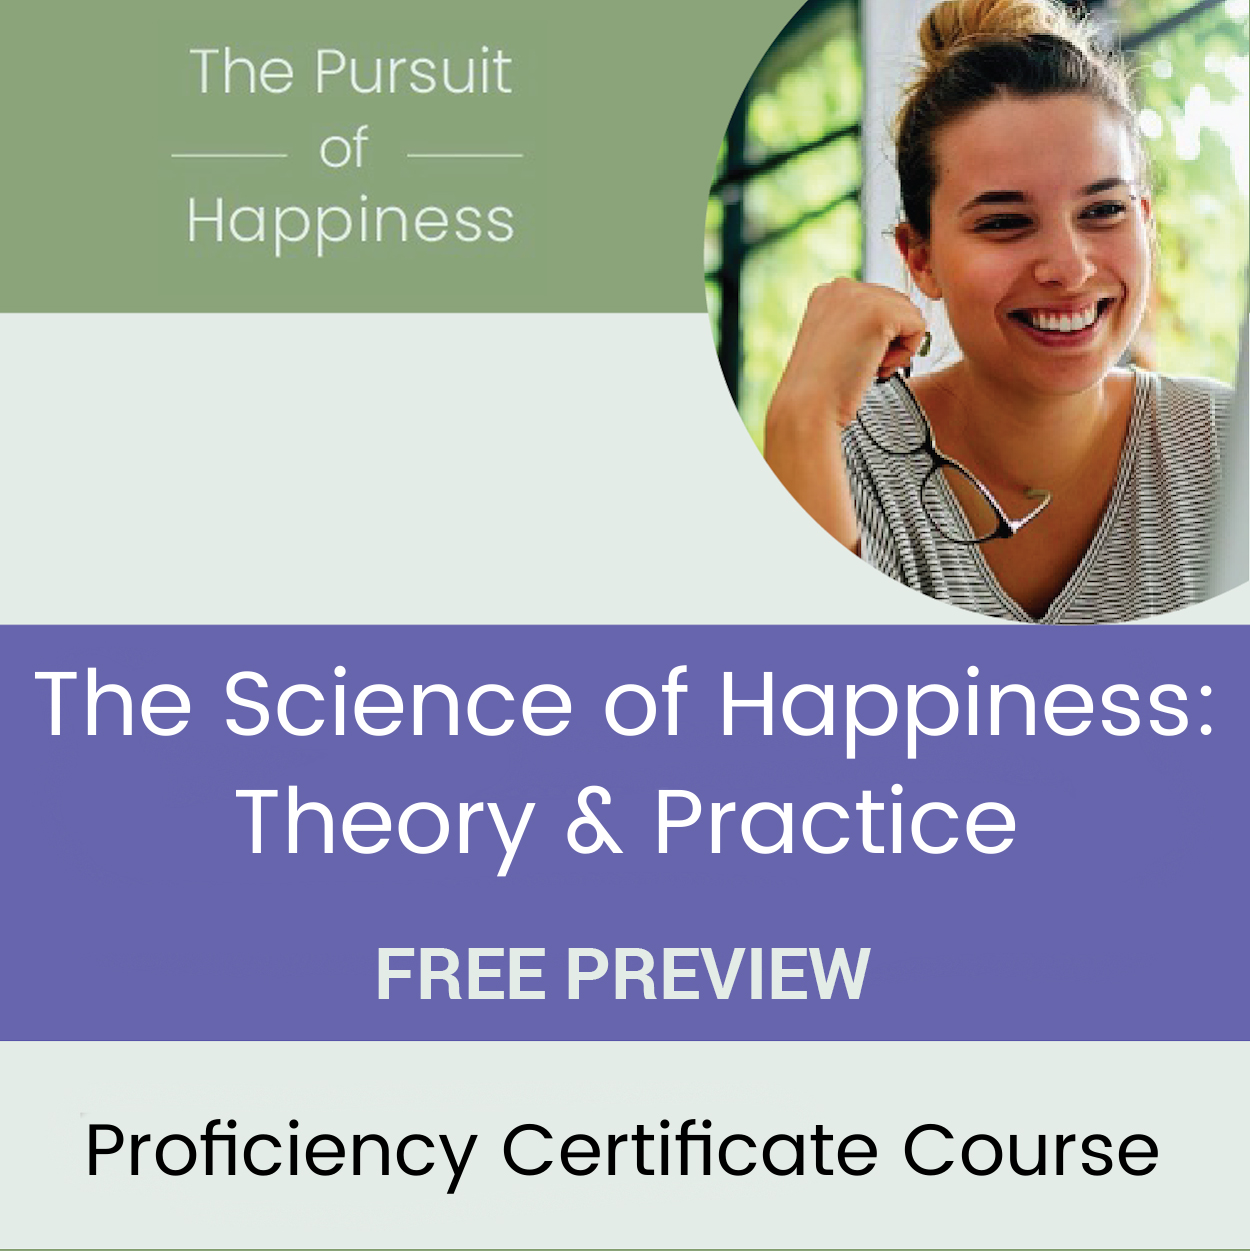 The Science of Happiness Proficiency Certificate Course